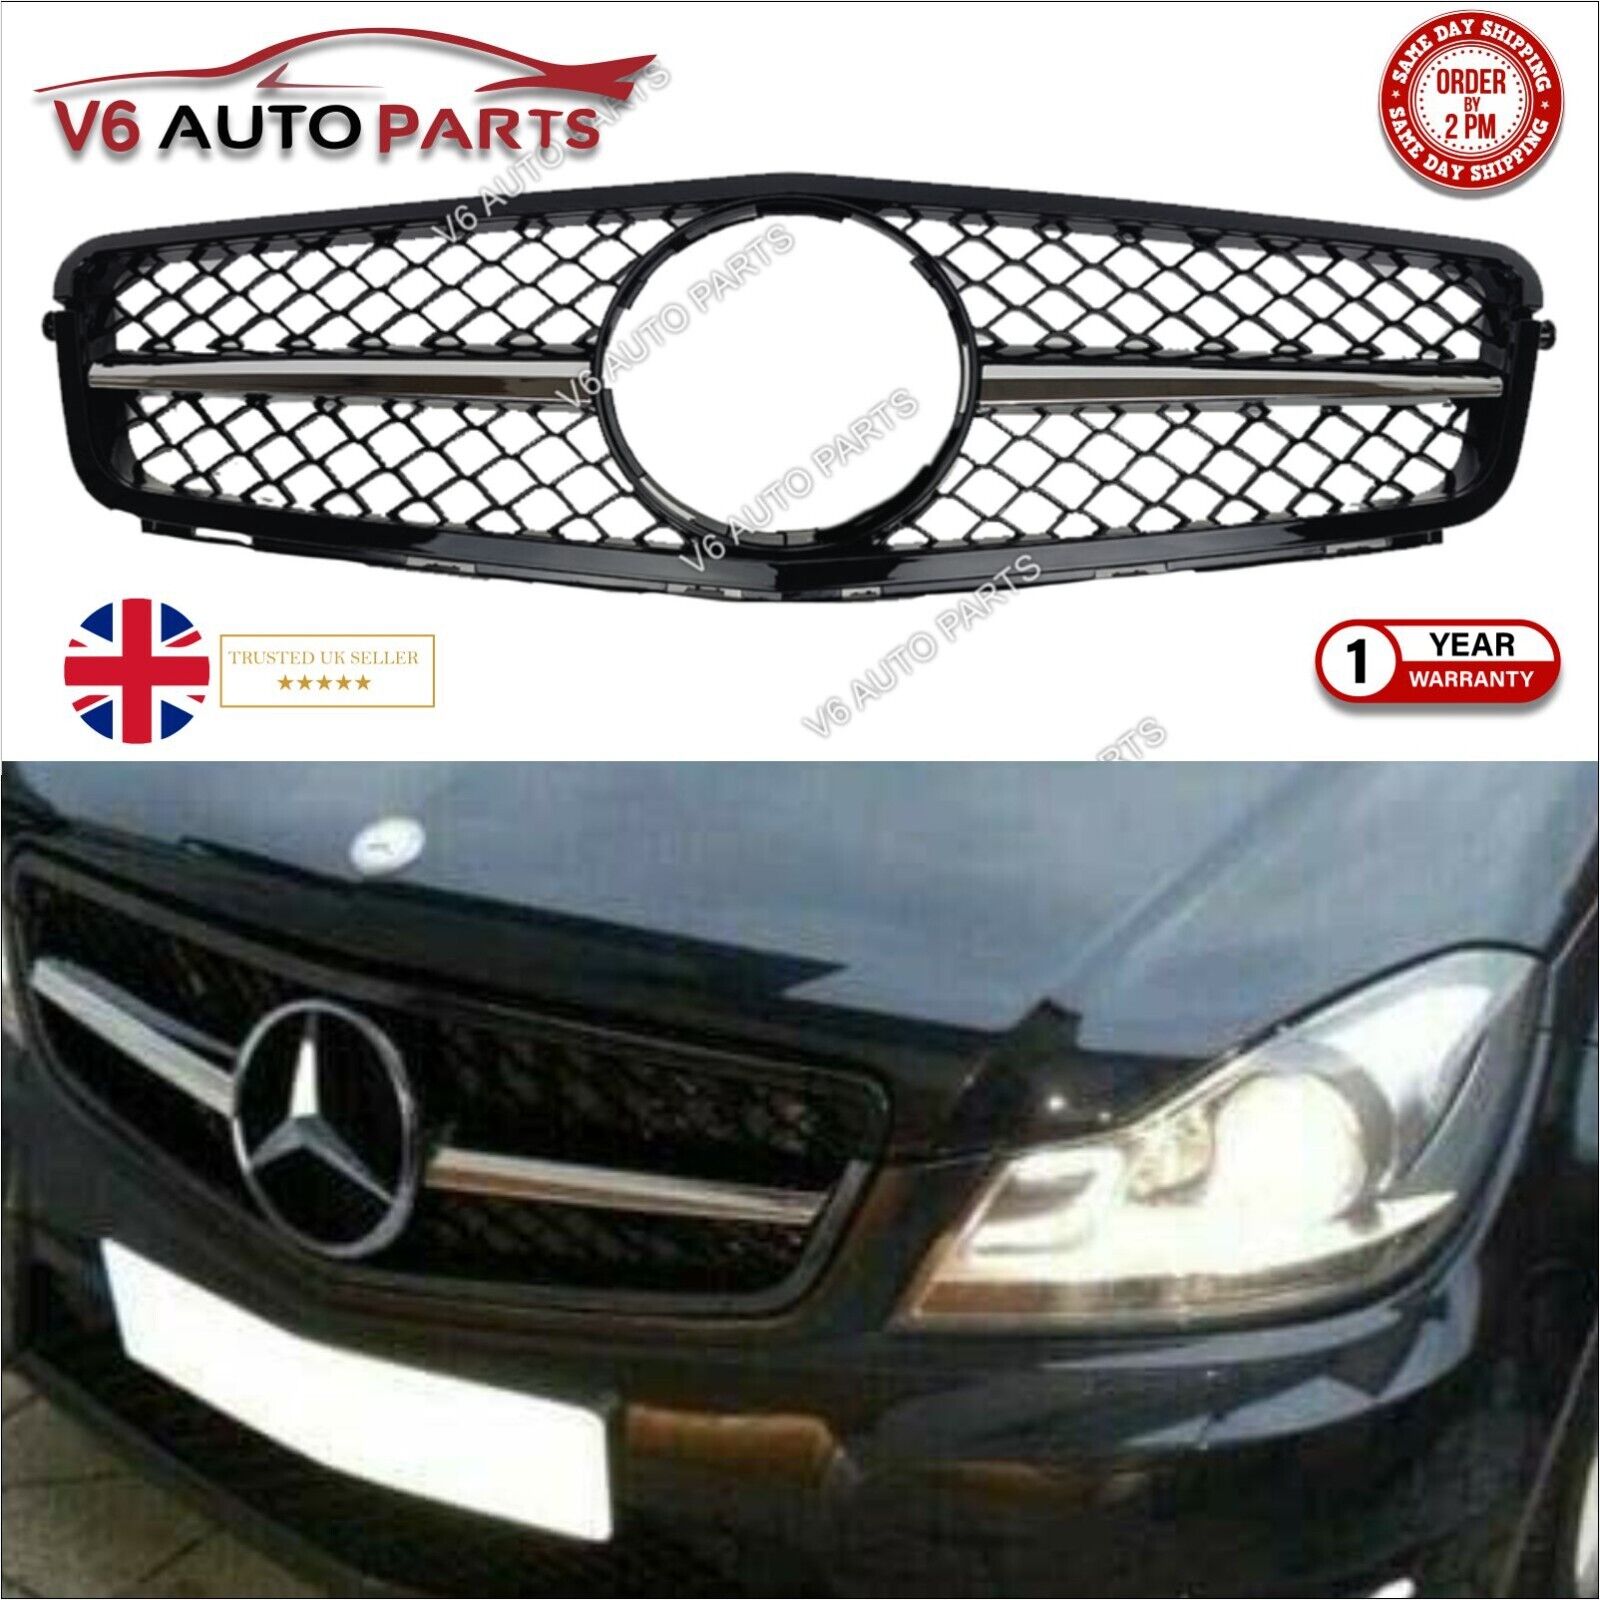 For Mercedes C-Class Front Radiator Grille W204 C200 Saloon C43 Grill 2007 - 14